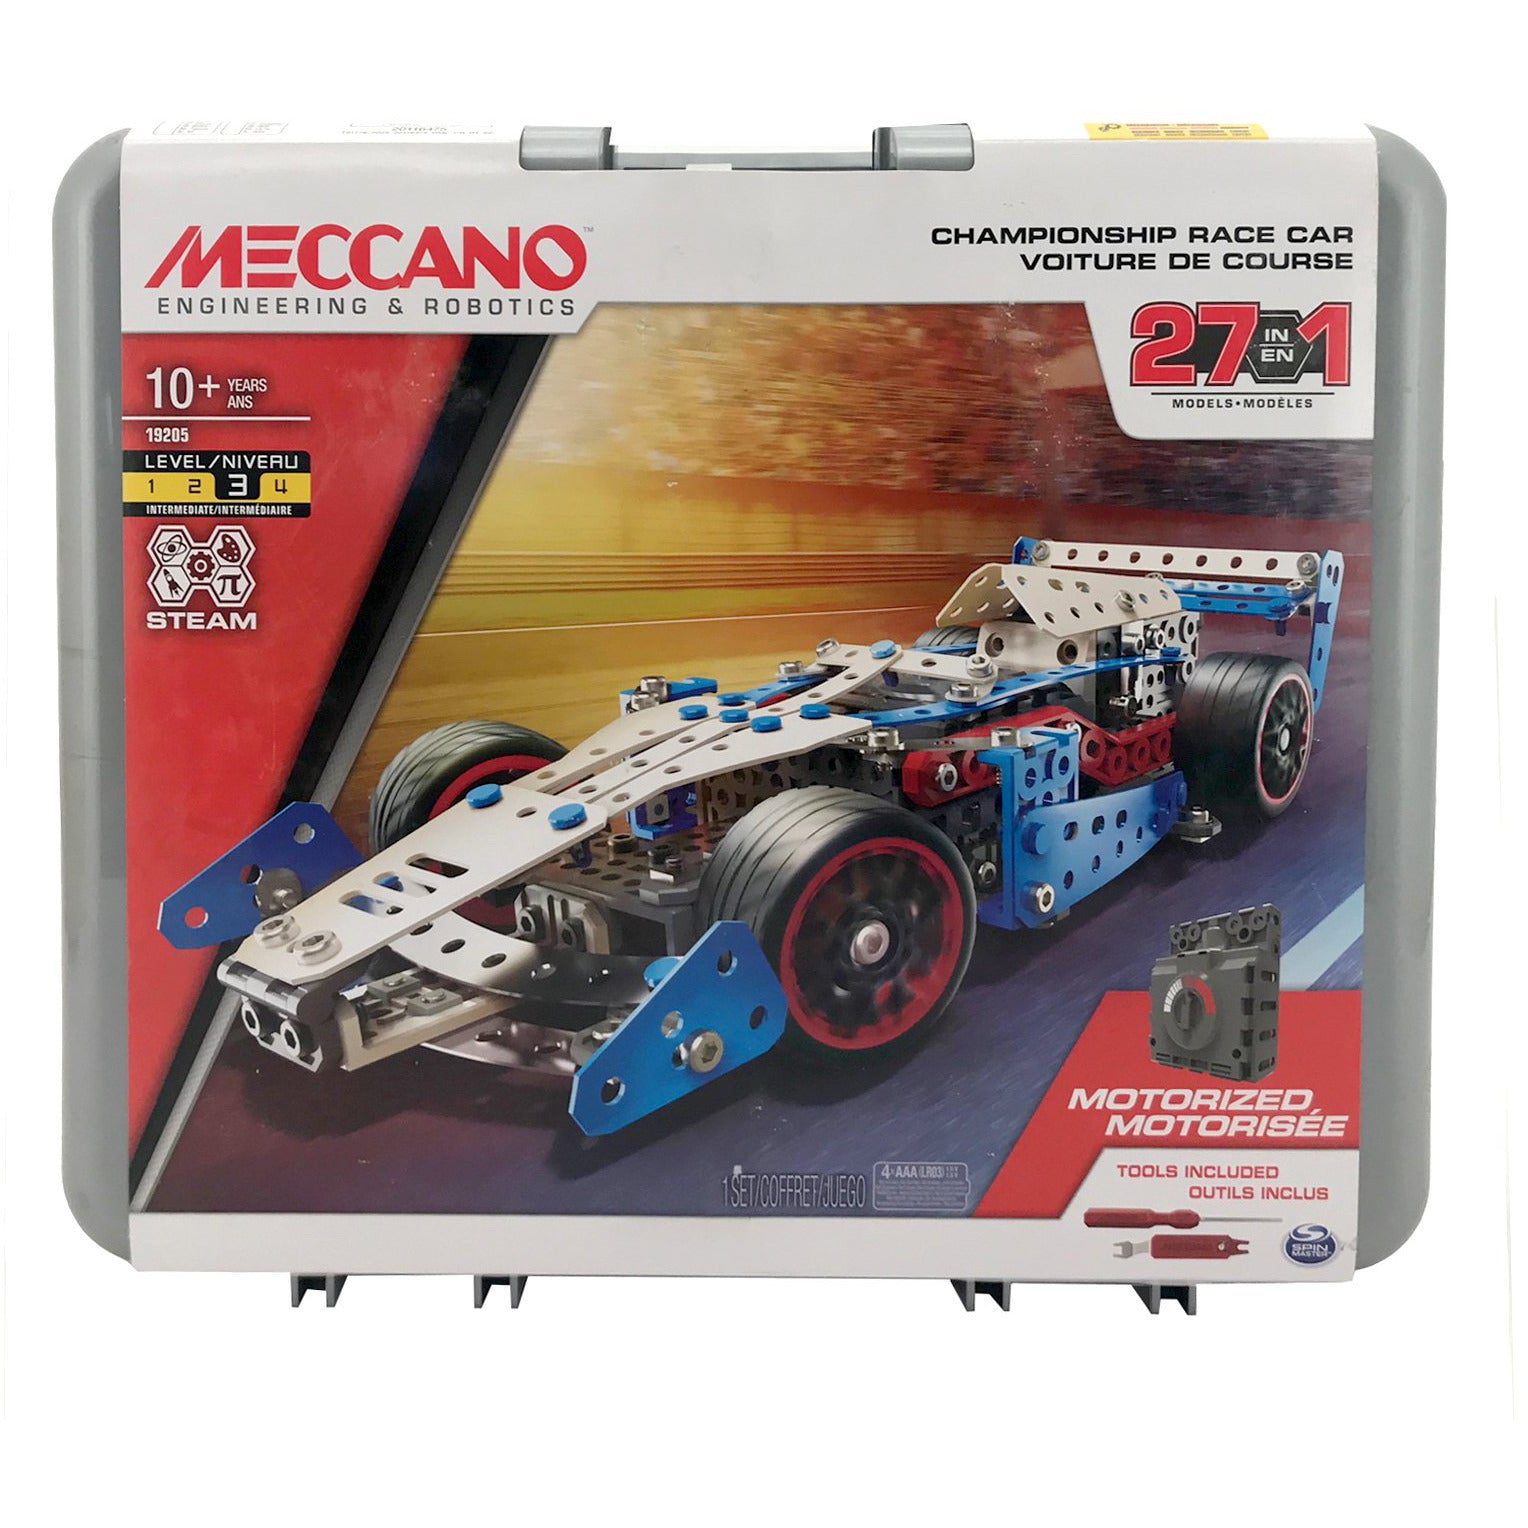 Meccano 27-in-1  Championship Race Car construciton STEAM Toy Like new conition